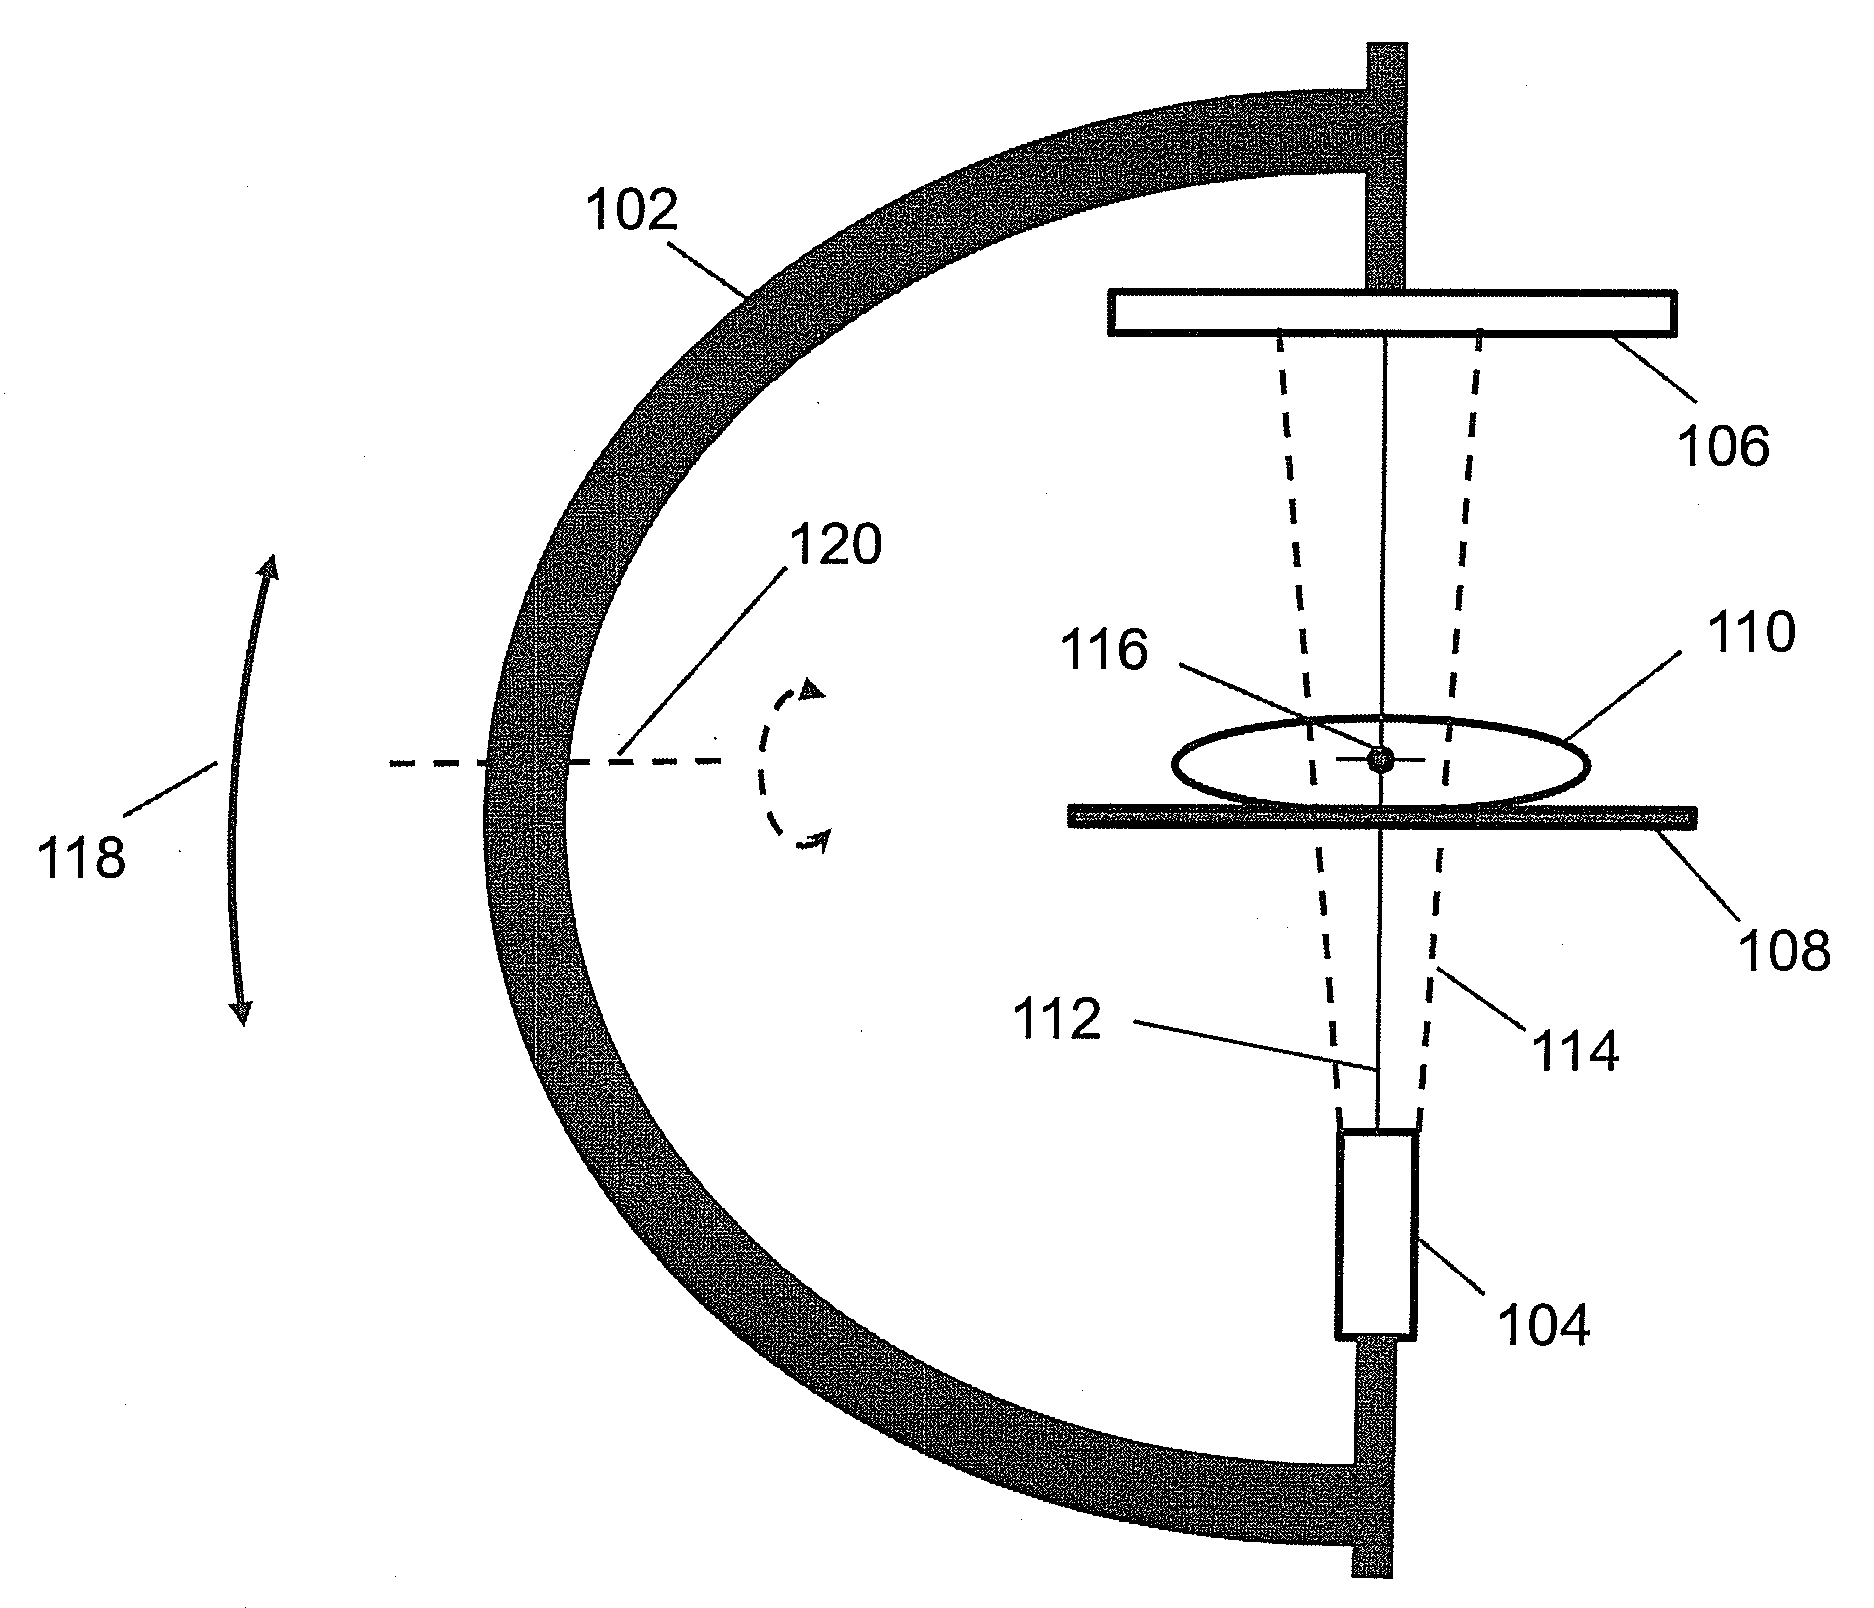 Needle Guidance With a Dual-Headed Laser